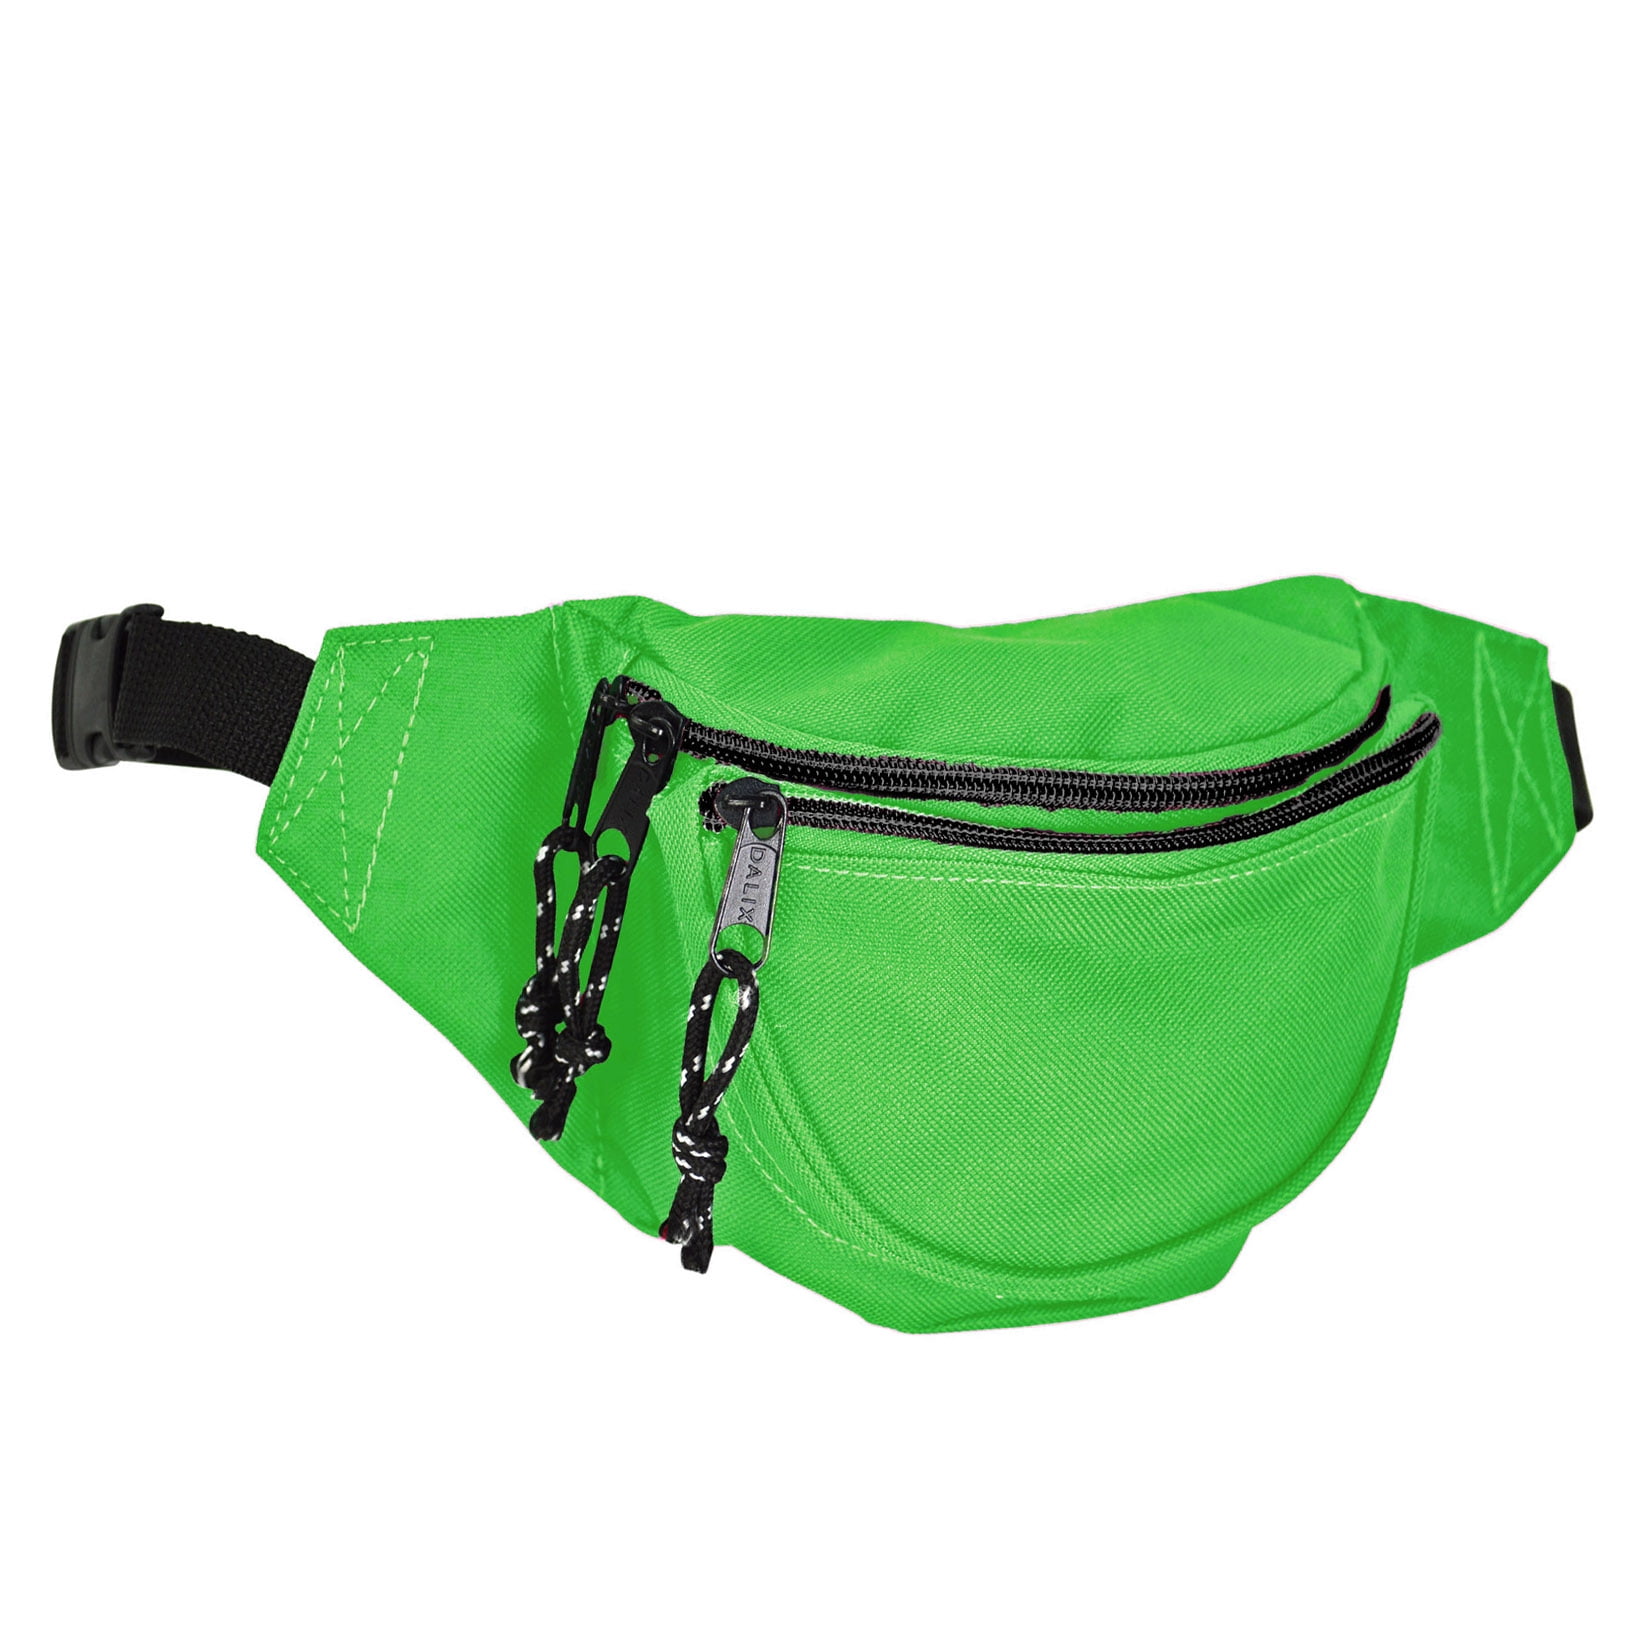 DALIX Unisex Small Fanny Pack Waist Pouch S XS Size 24 to 31 in Lime Green